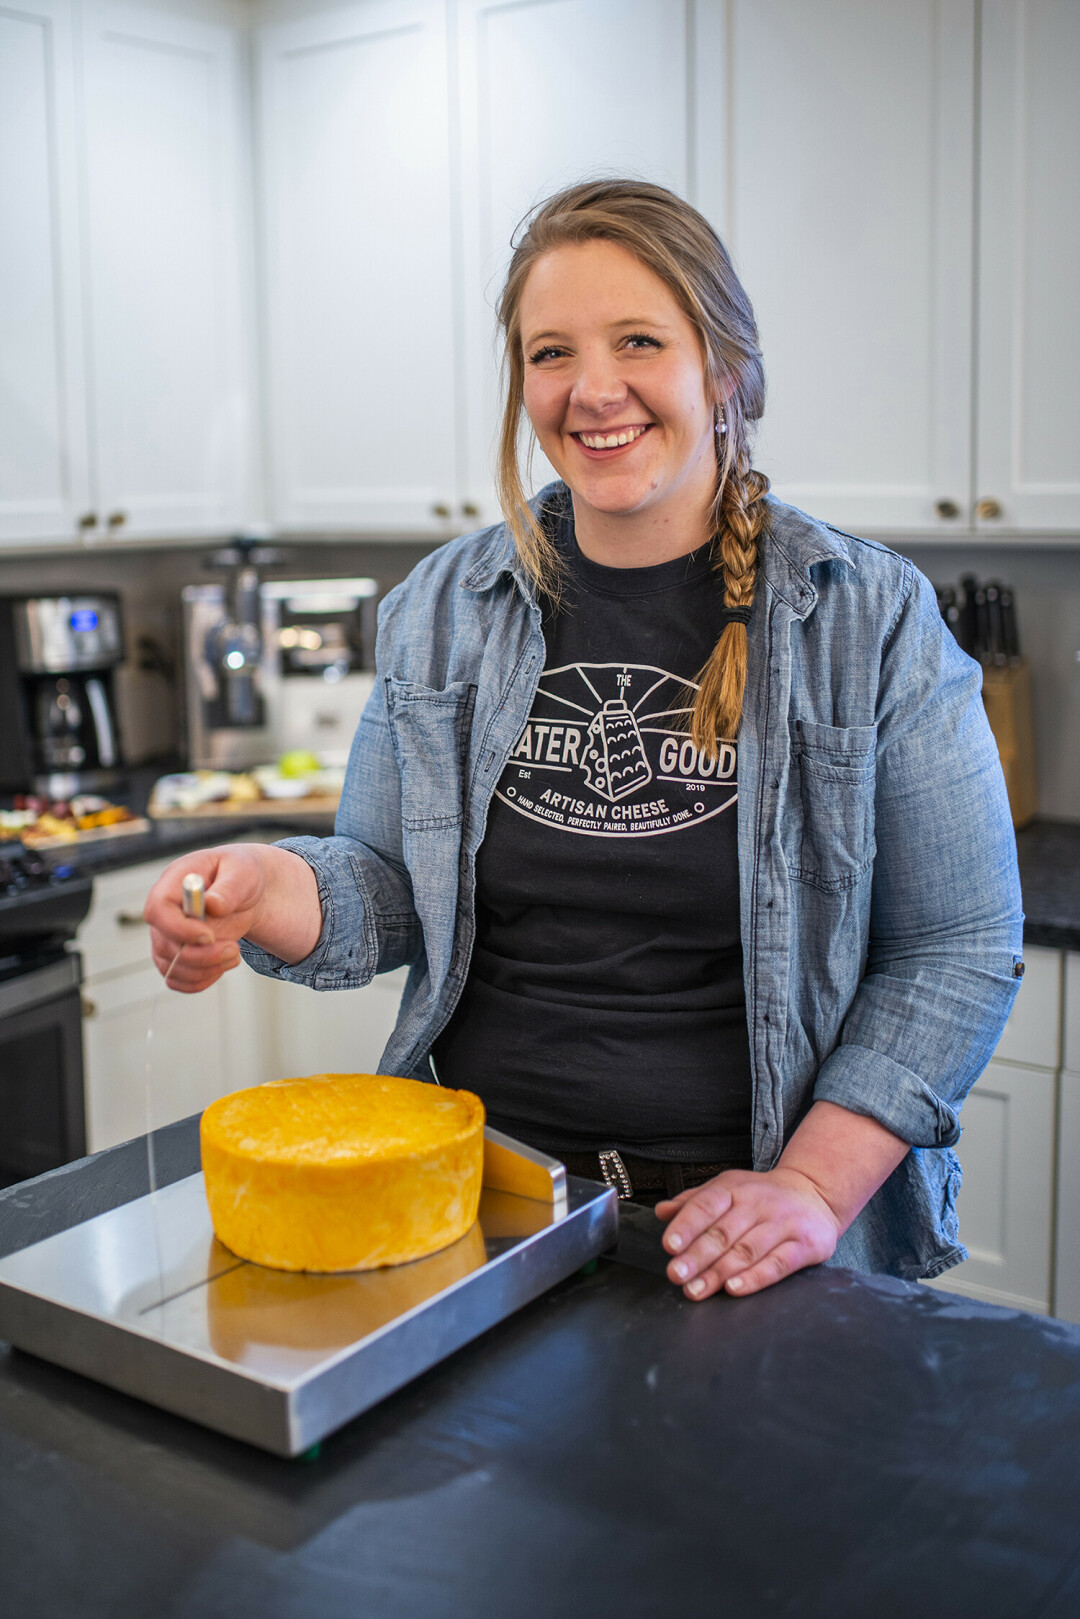 IT'S WHEEL-Y GOOD STUFF. UW-Stout alumna Christine Leonard has her own cheese platter business the Grater Good offering locally produced products. She also offers classes teaching about different cheeses. / Photo courtesy Christine Leonard and Maria Claire Photography